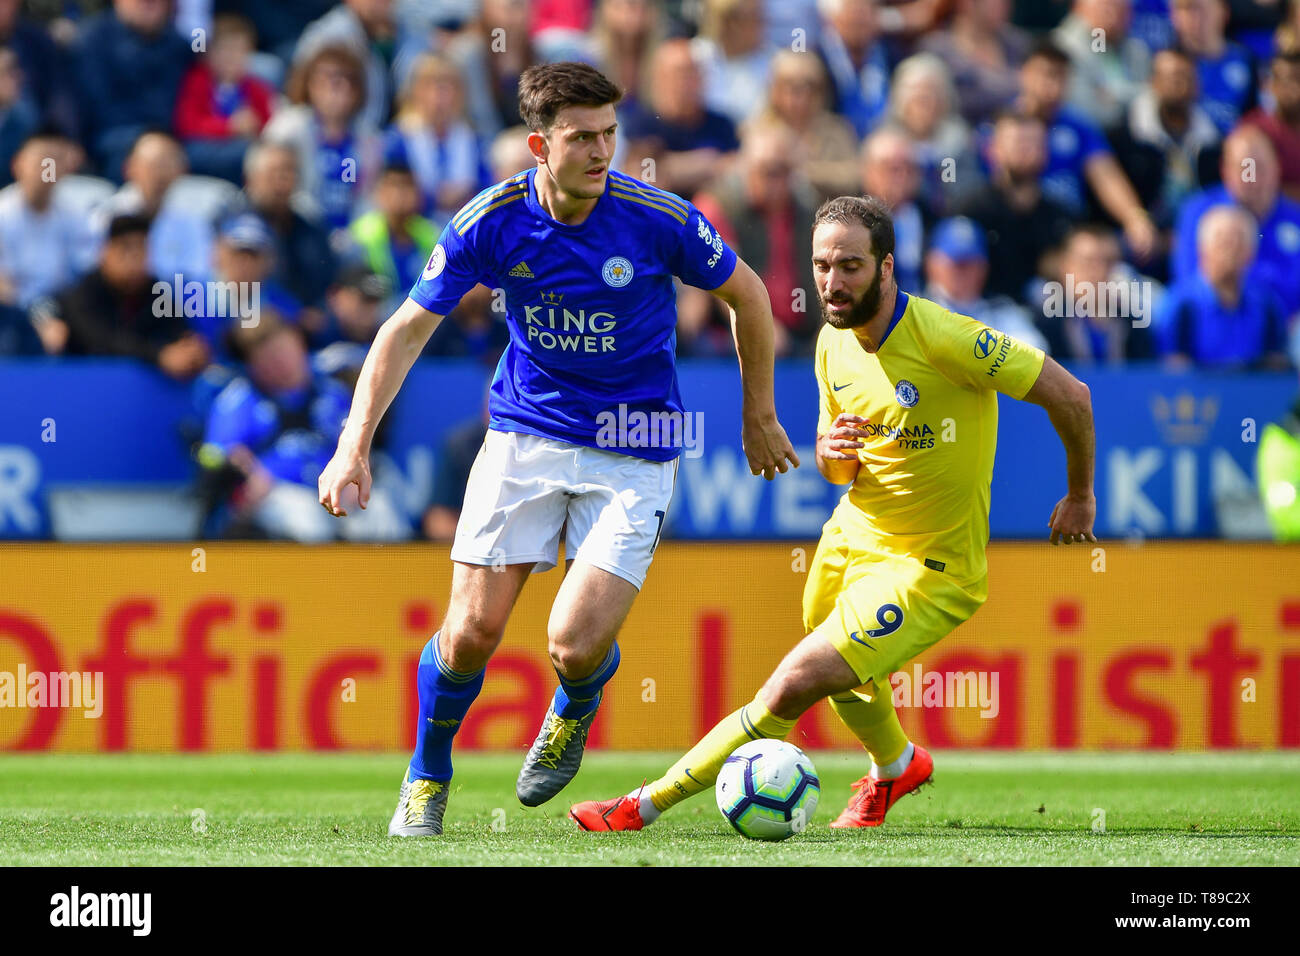 Leicester, UK. 12th May, 2019. Leicester City defender Harry Maguire (15) battles with Gonzalo Higuain (9) of Chelsea during the Premier League match between Leicester City and Chelsea at the King Power Stadium, Leicester on Sunday 12th May 2019. (Credit: Jon Hobley | MI News) Editorial use only, license required for commercial use. Photograph may only be used for newspaper and/or magazine editorial purposes. Credit: MI News & Sport /Alamy Live News Stock Photo